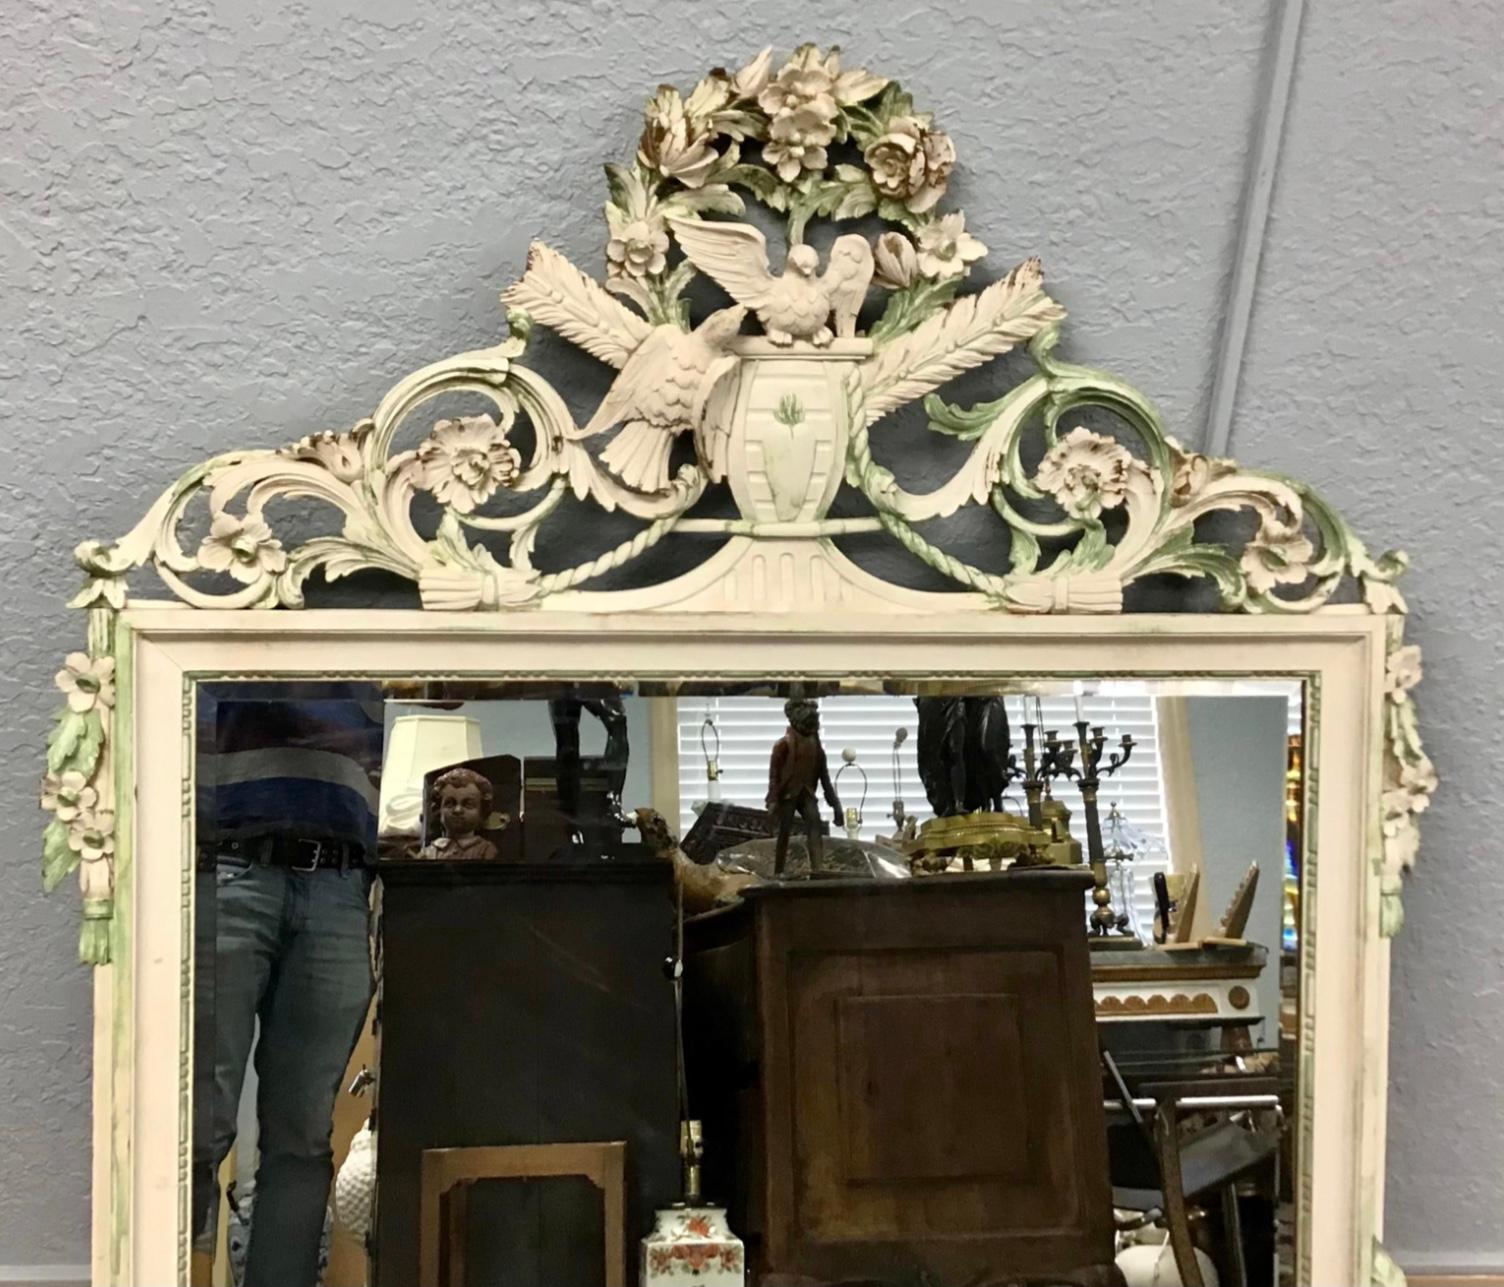 Italian, late 19th century. Cream and green painted carved wooden mirror in the neoclassical taste, having a foliate crest decorated with a pair of doves or lovebirds and arrows, the beaded inner fillet containing a beveled mirror plate. Wonderful